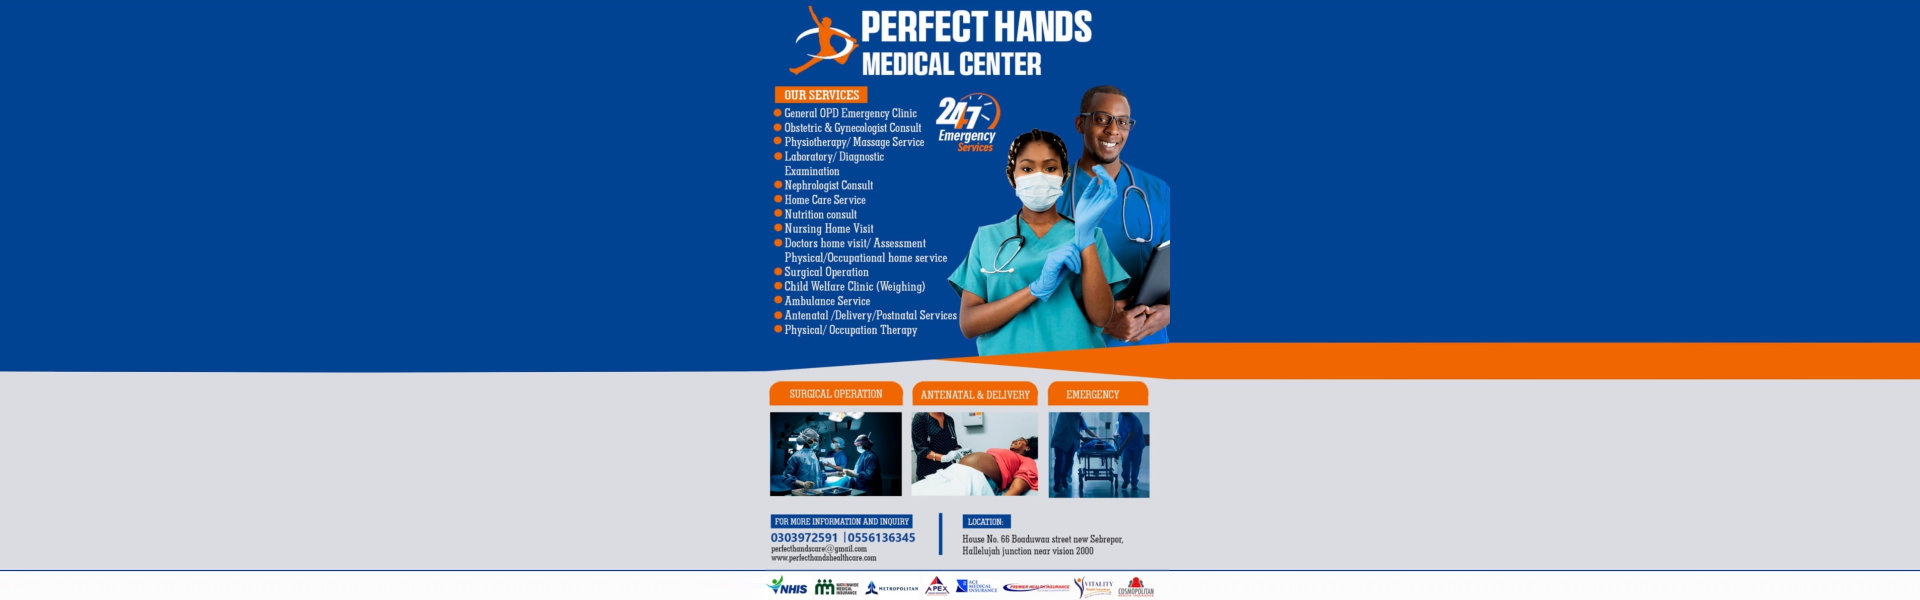 perfect hands medical center services flyer